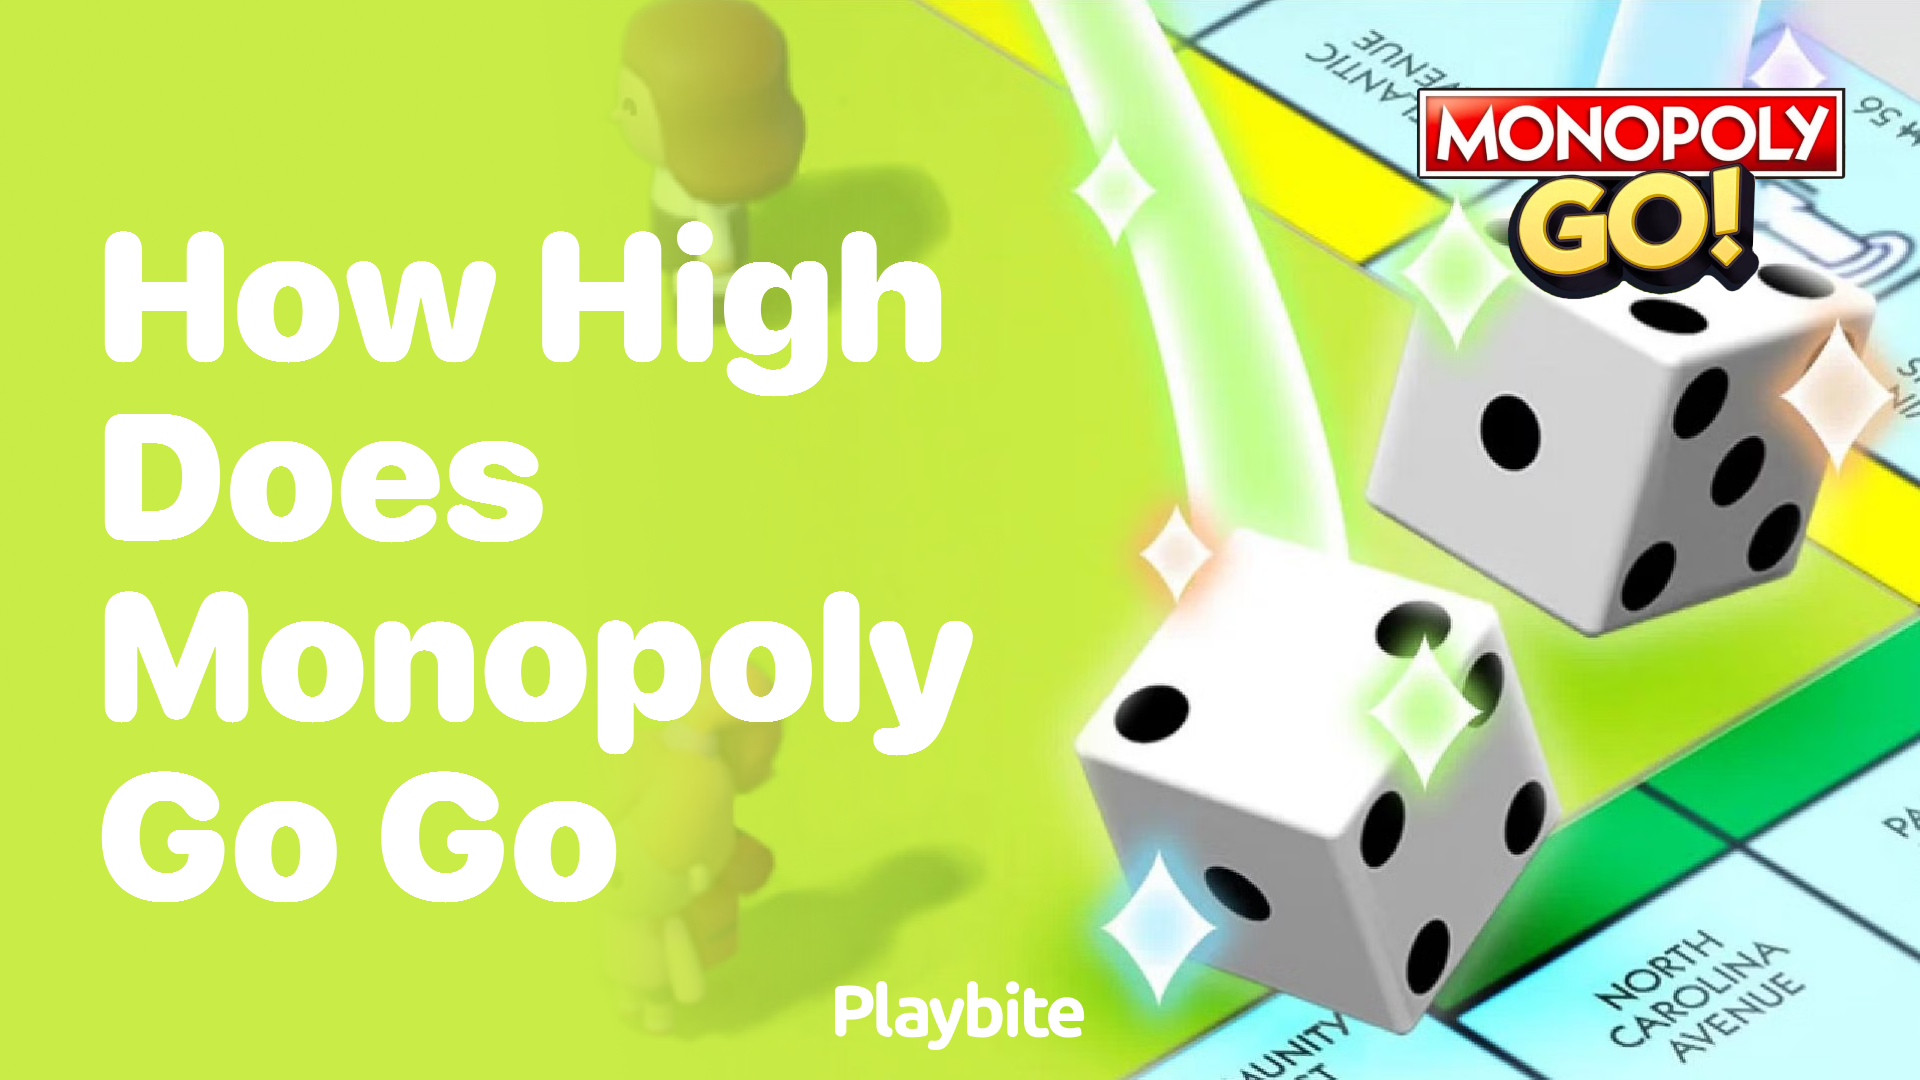 How High Does Monopoly Go Reach in Popularity and Success?